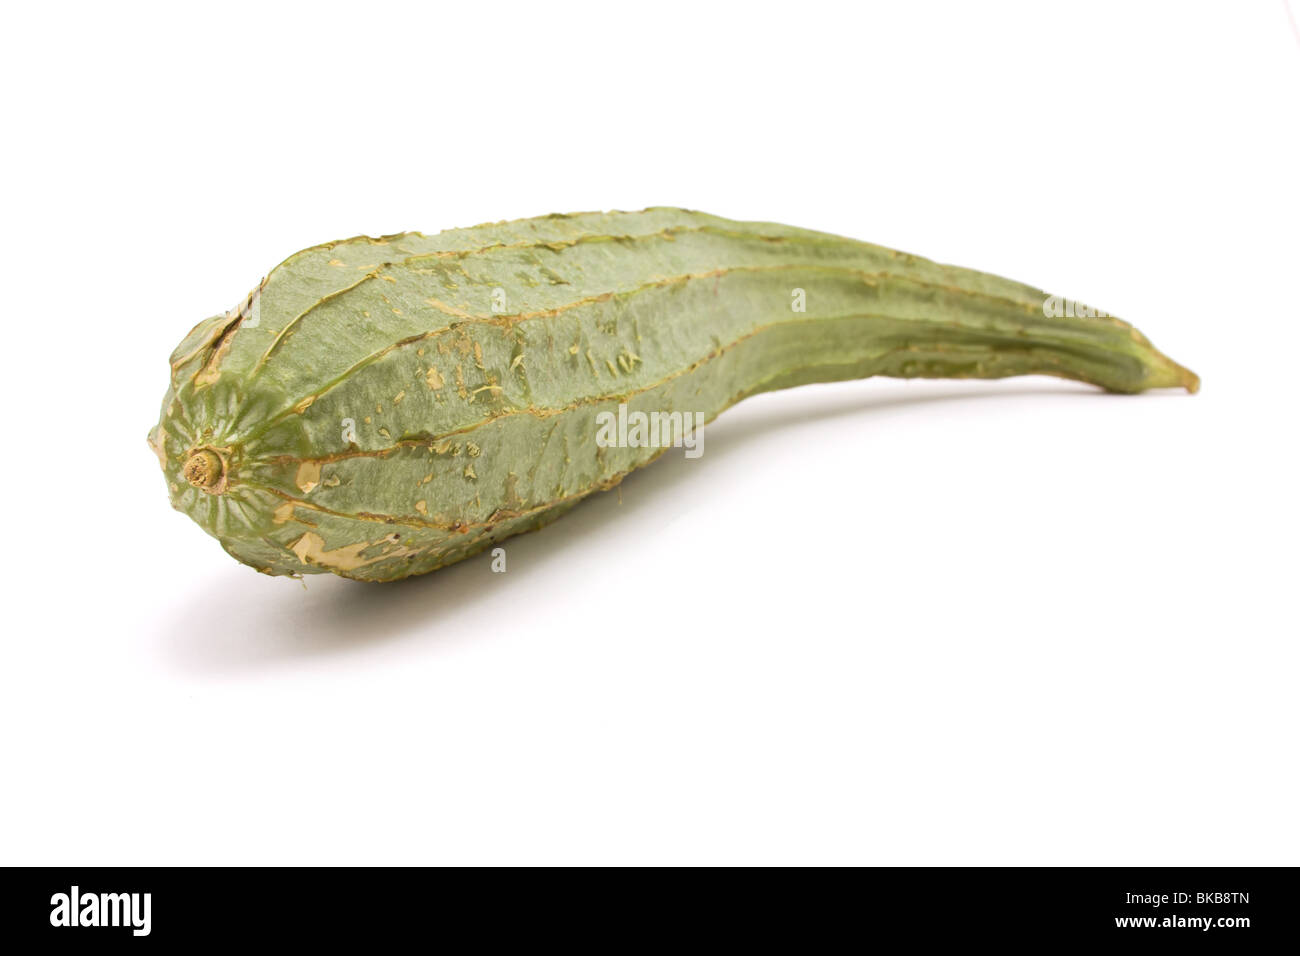 Raw Luffa Squash or Touria used in asian cooking or dried out to scrub your back. Stock Photo